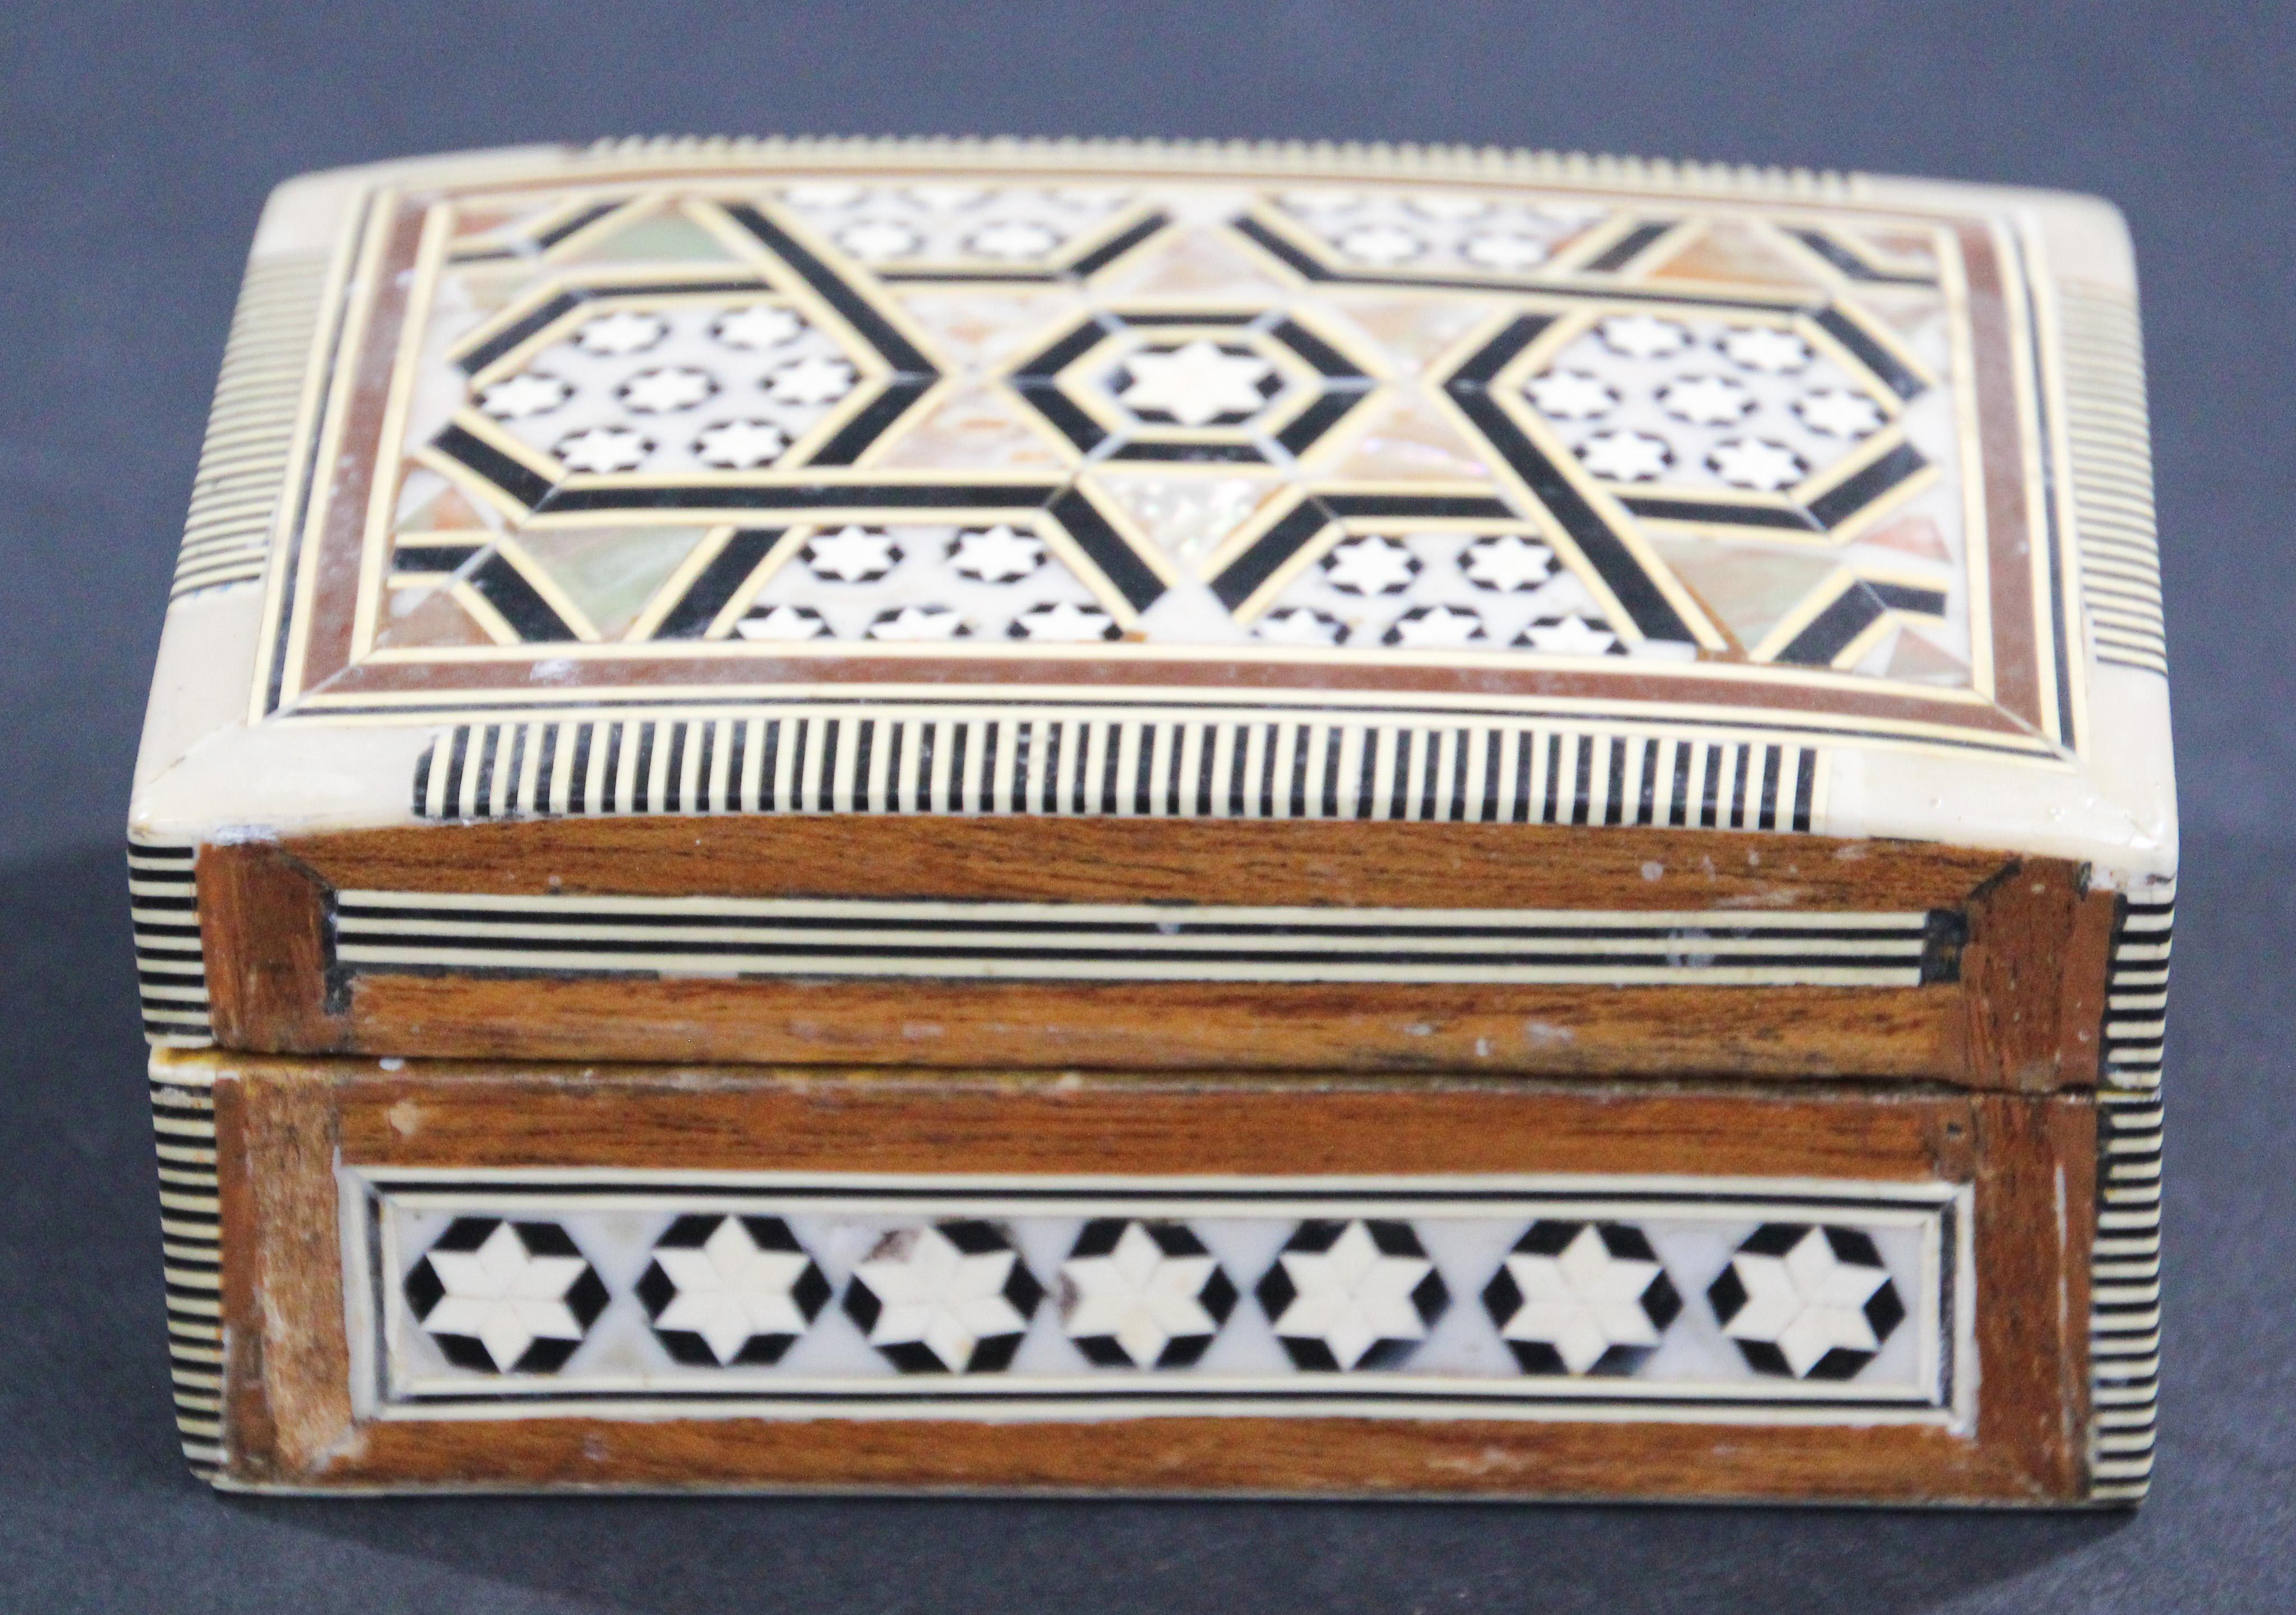 Exquisite handcrafted Middle Eastern mosaic marquetry inlaid walnut wood box.
Small box intricately decorated with Moorish Star of David motif designs which have been painstakingly inlaid with mosaic marquetry, mother of pearl and